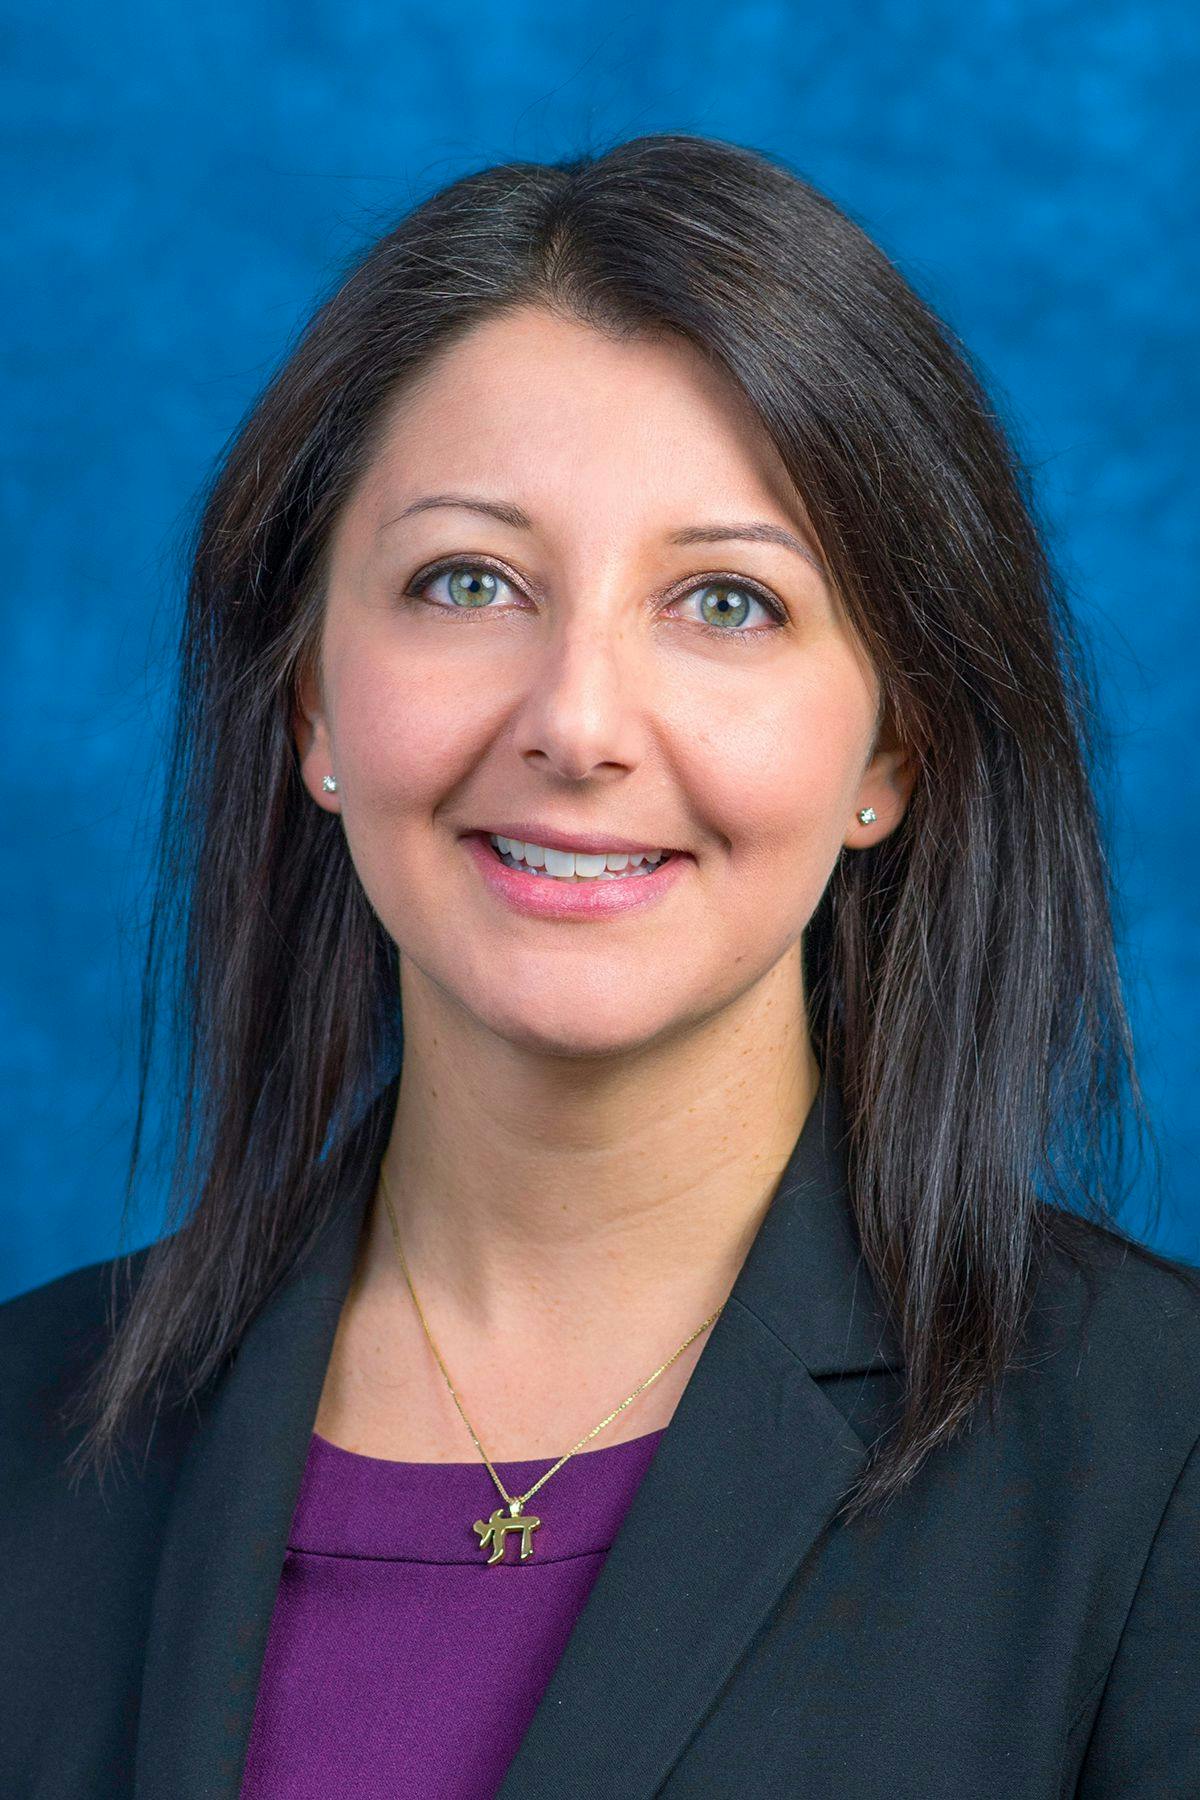 Mandy Cohen, President Biden's pick to lead the CDC, previously directed North Carolina's health department. (Photo: North Carolina Department of Health & Human Services)